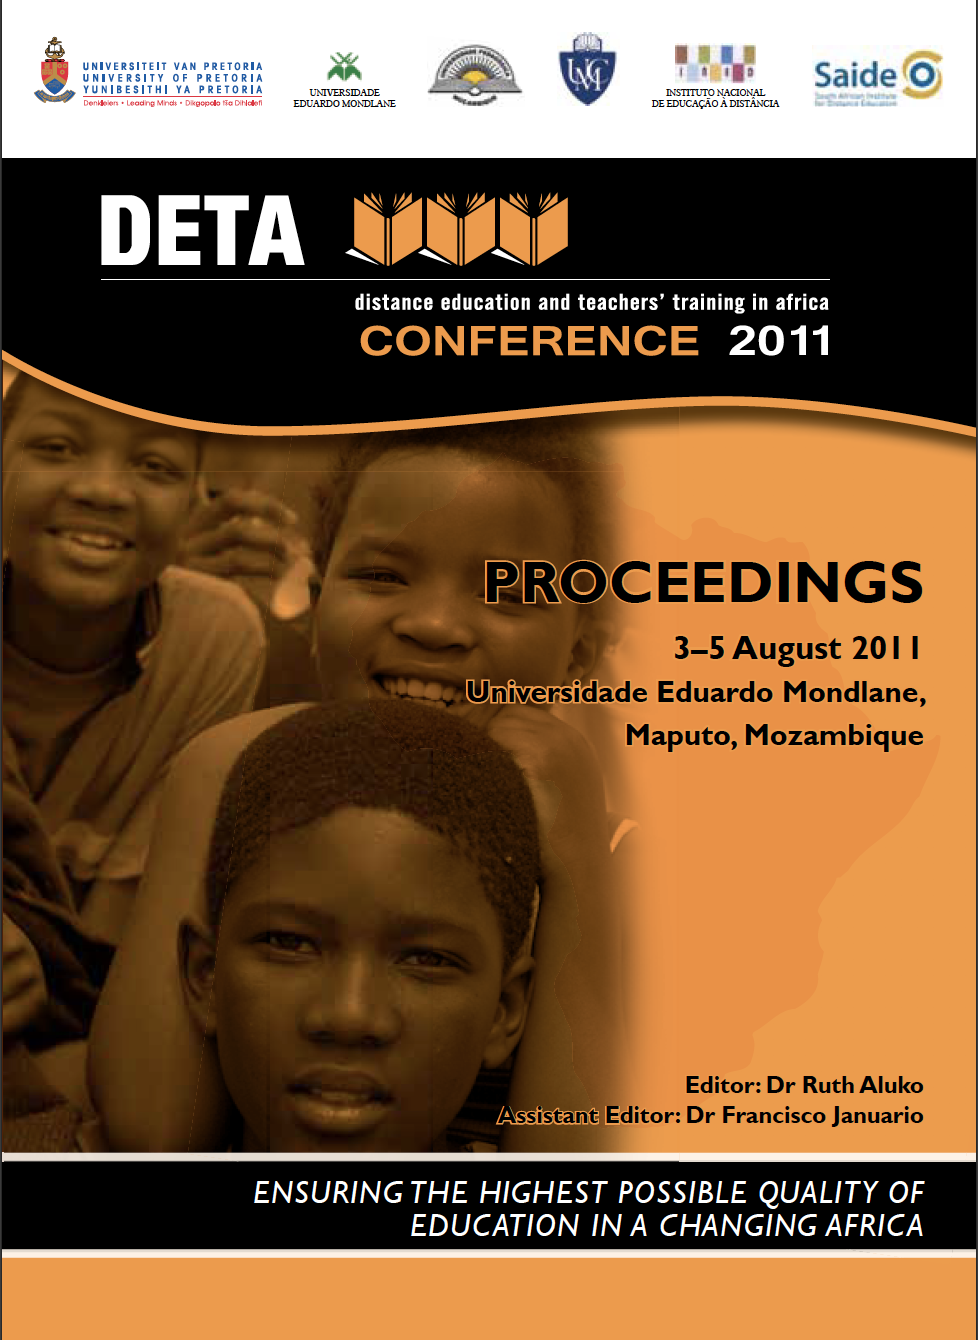 					View 2011: DETA CONFERENCE 2011: Ensuring the Highest Possible Quality of Education in a Changing Africa
				